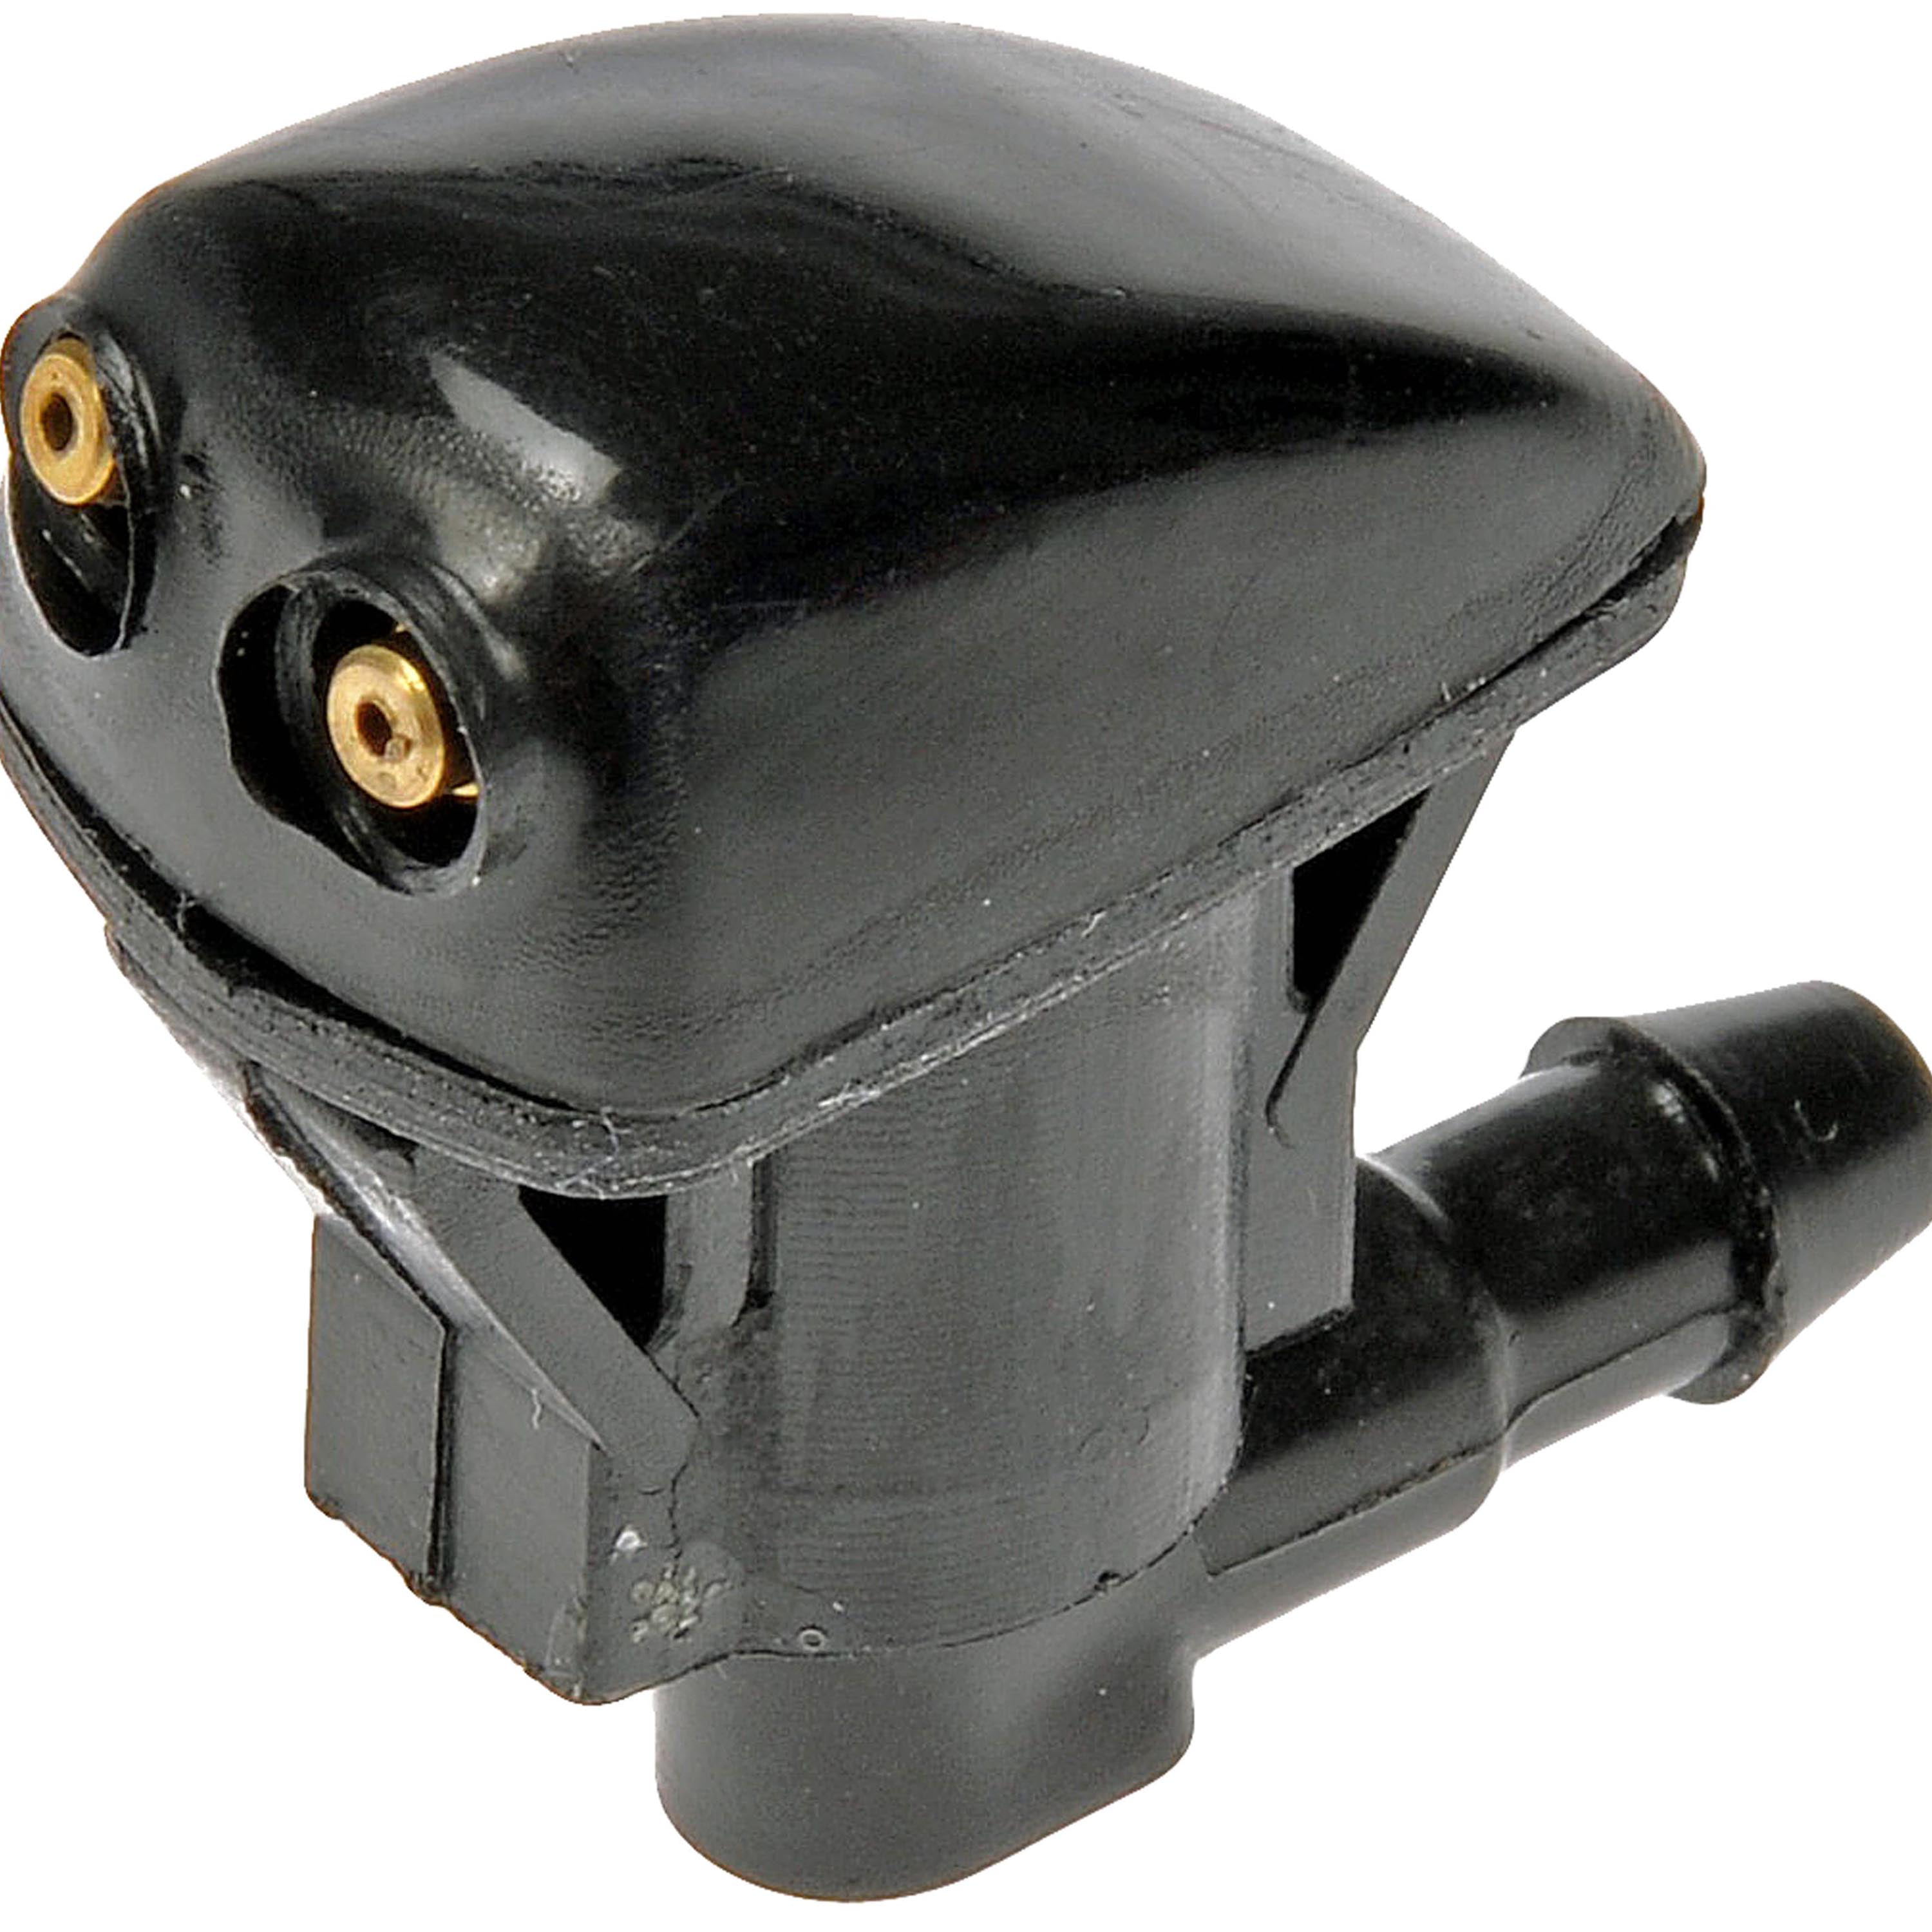 Dorman 47232 Windshield Washer Nozzle for Select Toyota Models, Black